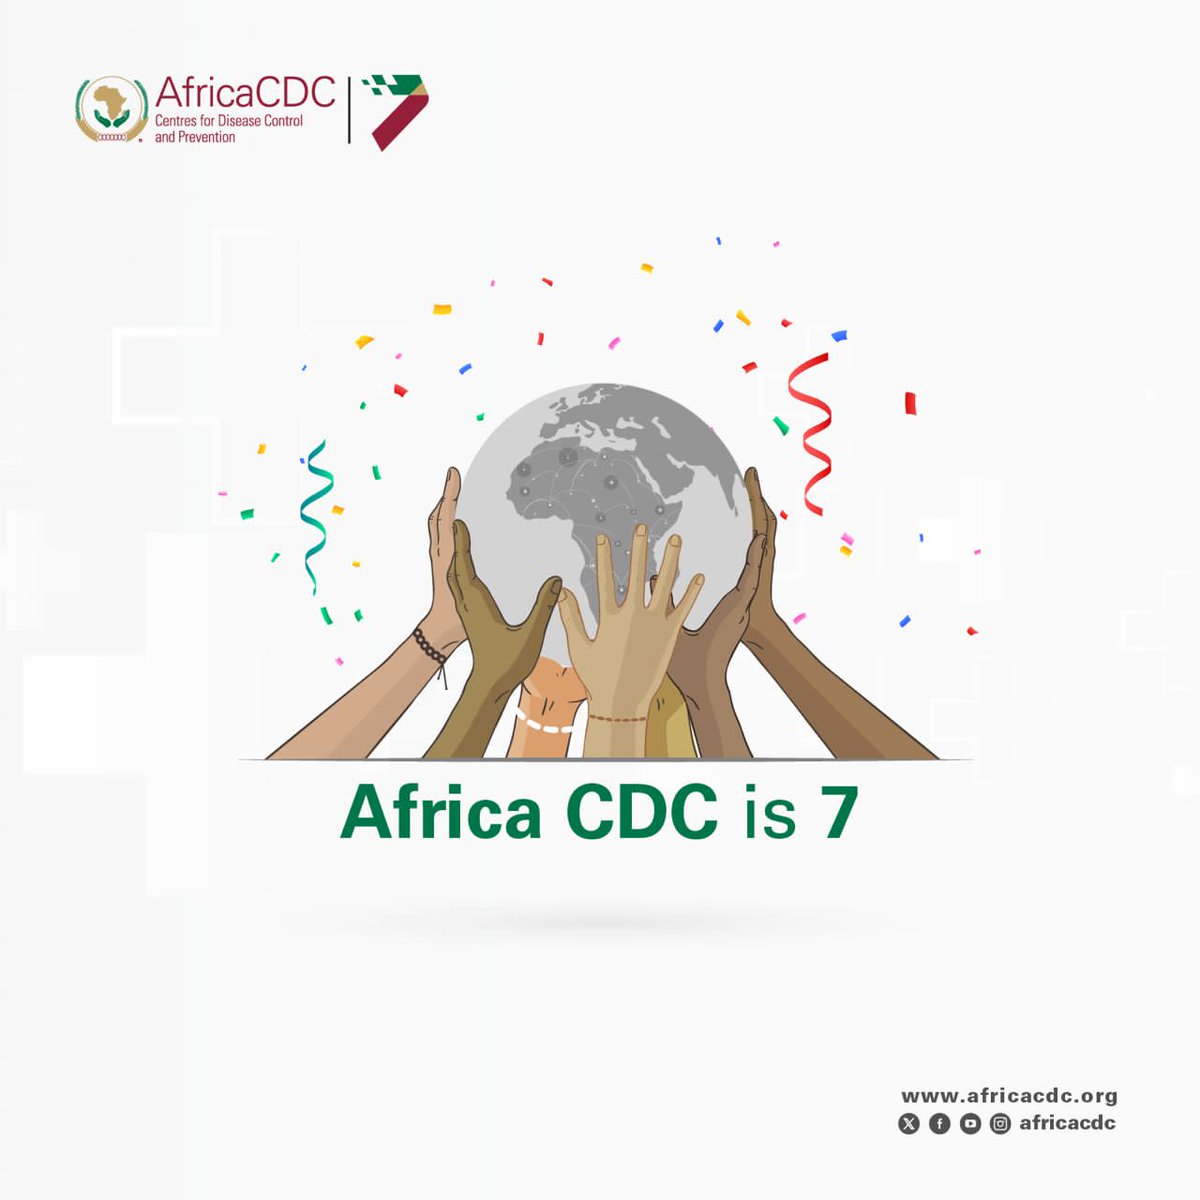 Today marks a significant milestone for @AfricaCDC. We are celebrating our 7th anniversary under the theme “A journey of Commitment and Action to safeguard Africa’s health”. This anniversary is an opportunity for us to celebrate all the stakeholders who support @AfricaCDC in the